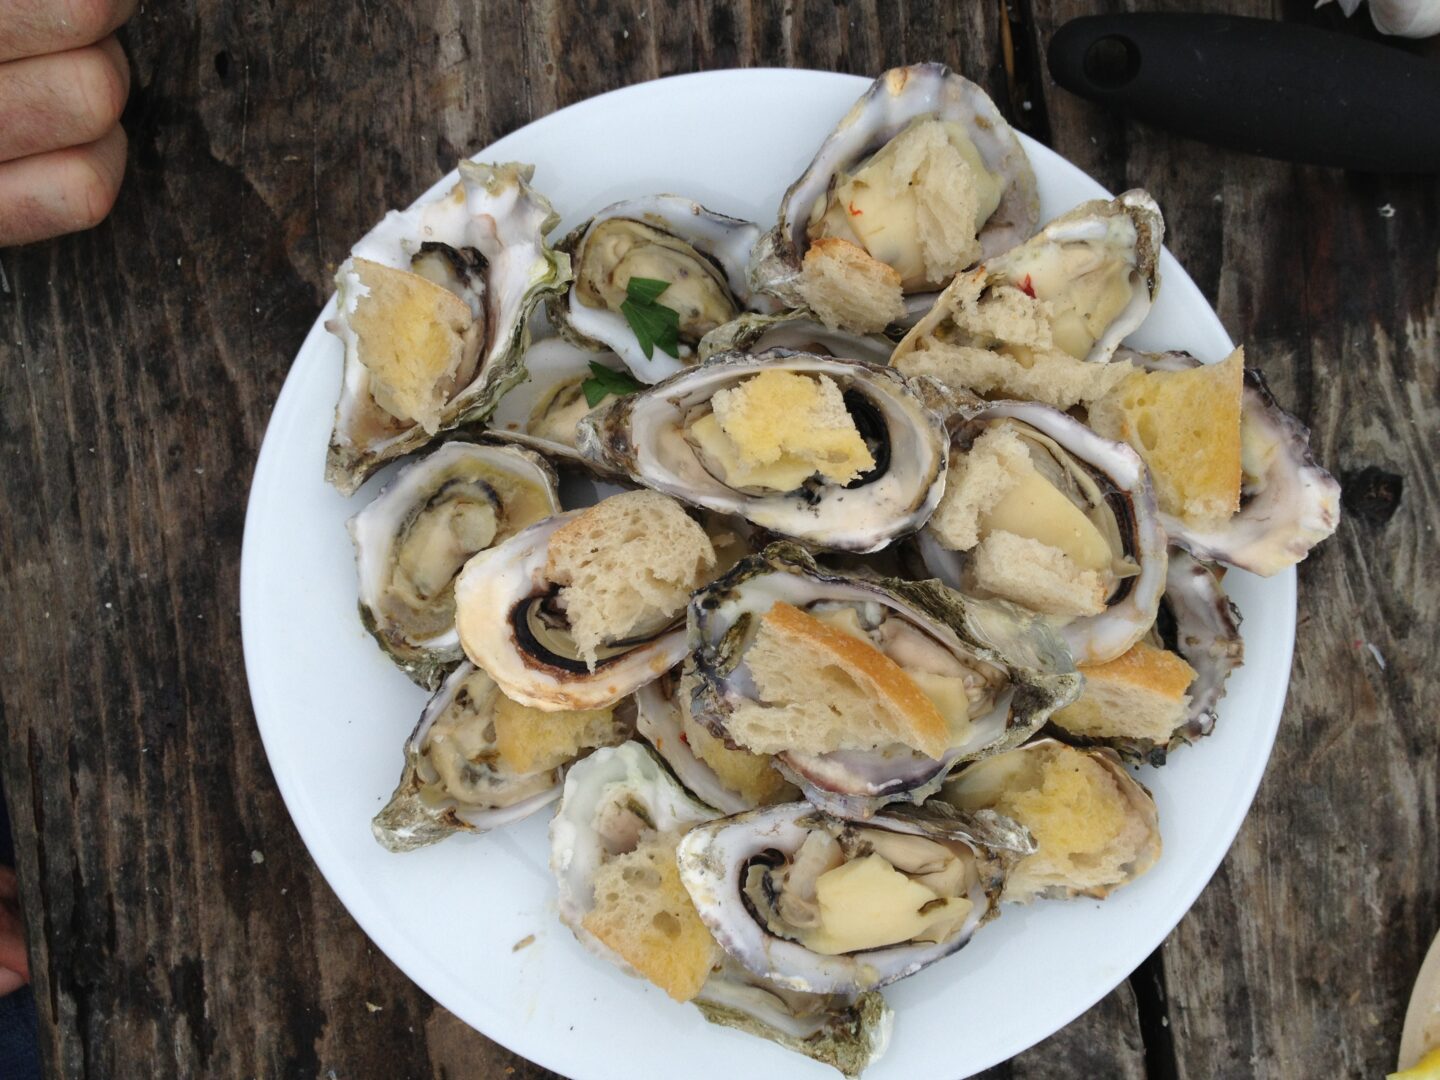 A plate of oysters on a wooden table.